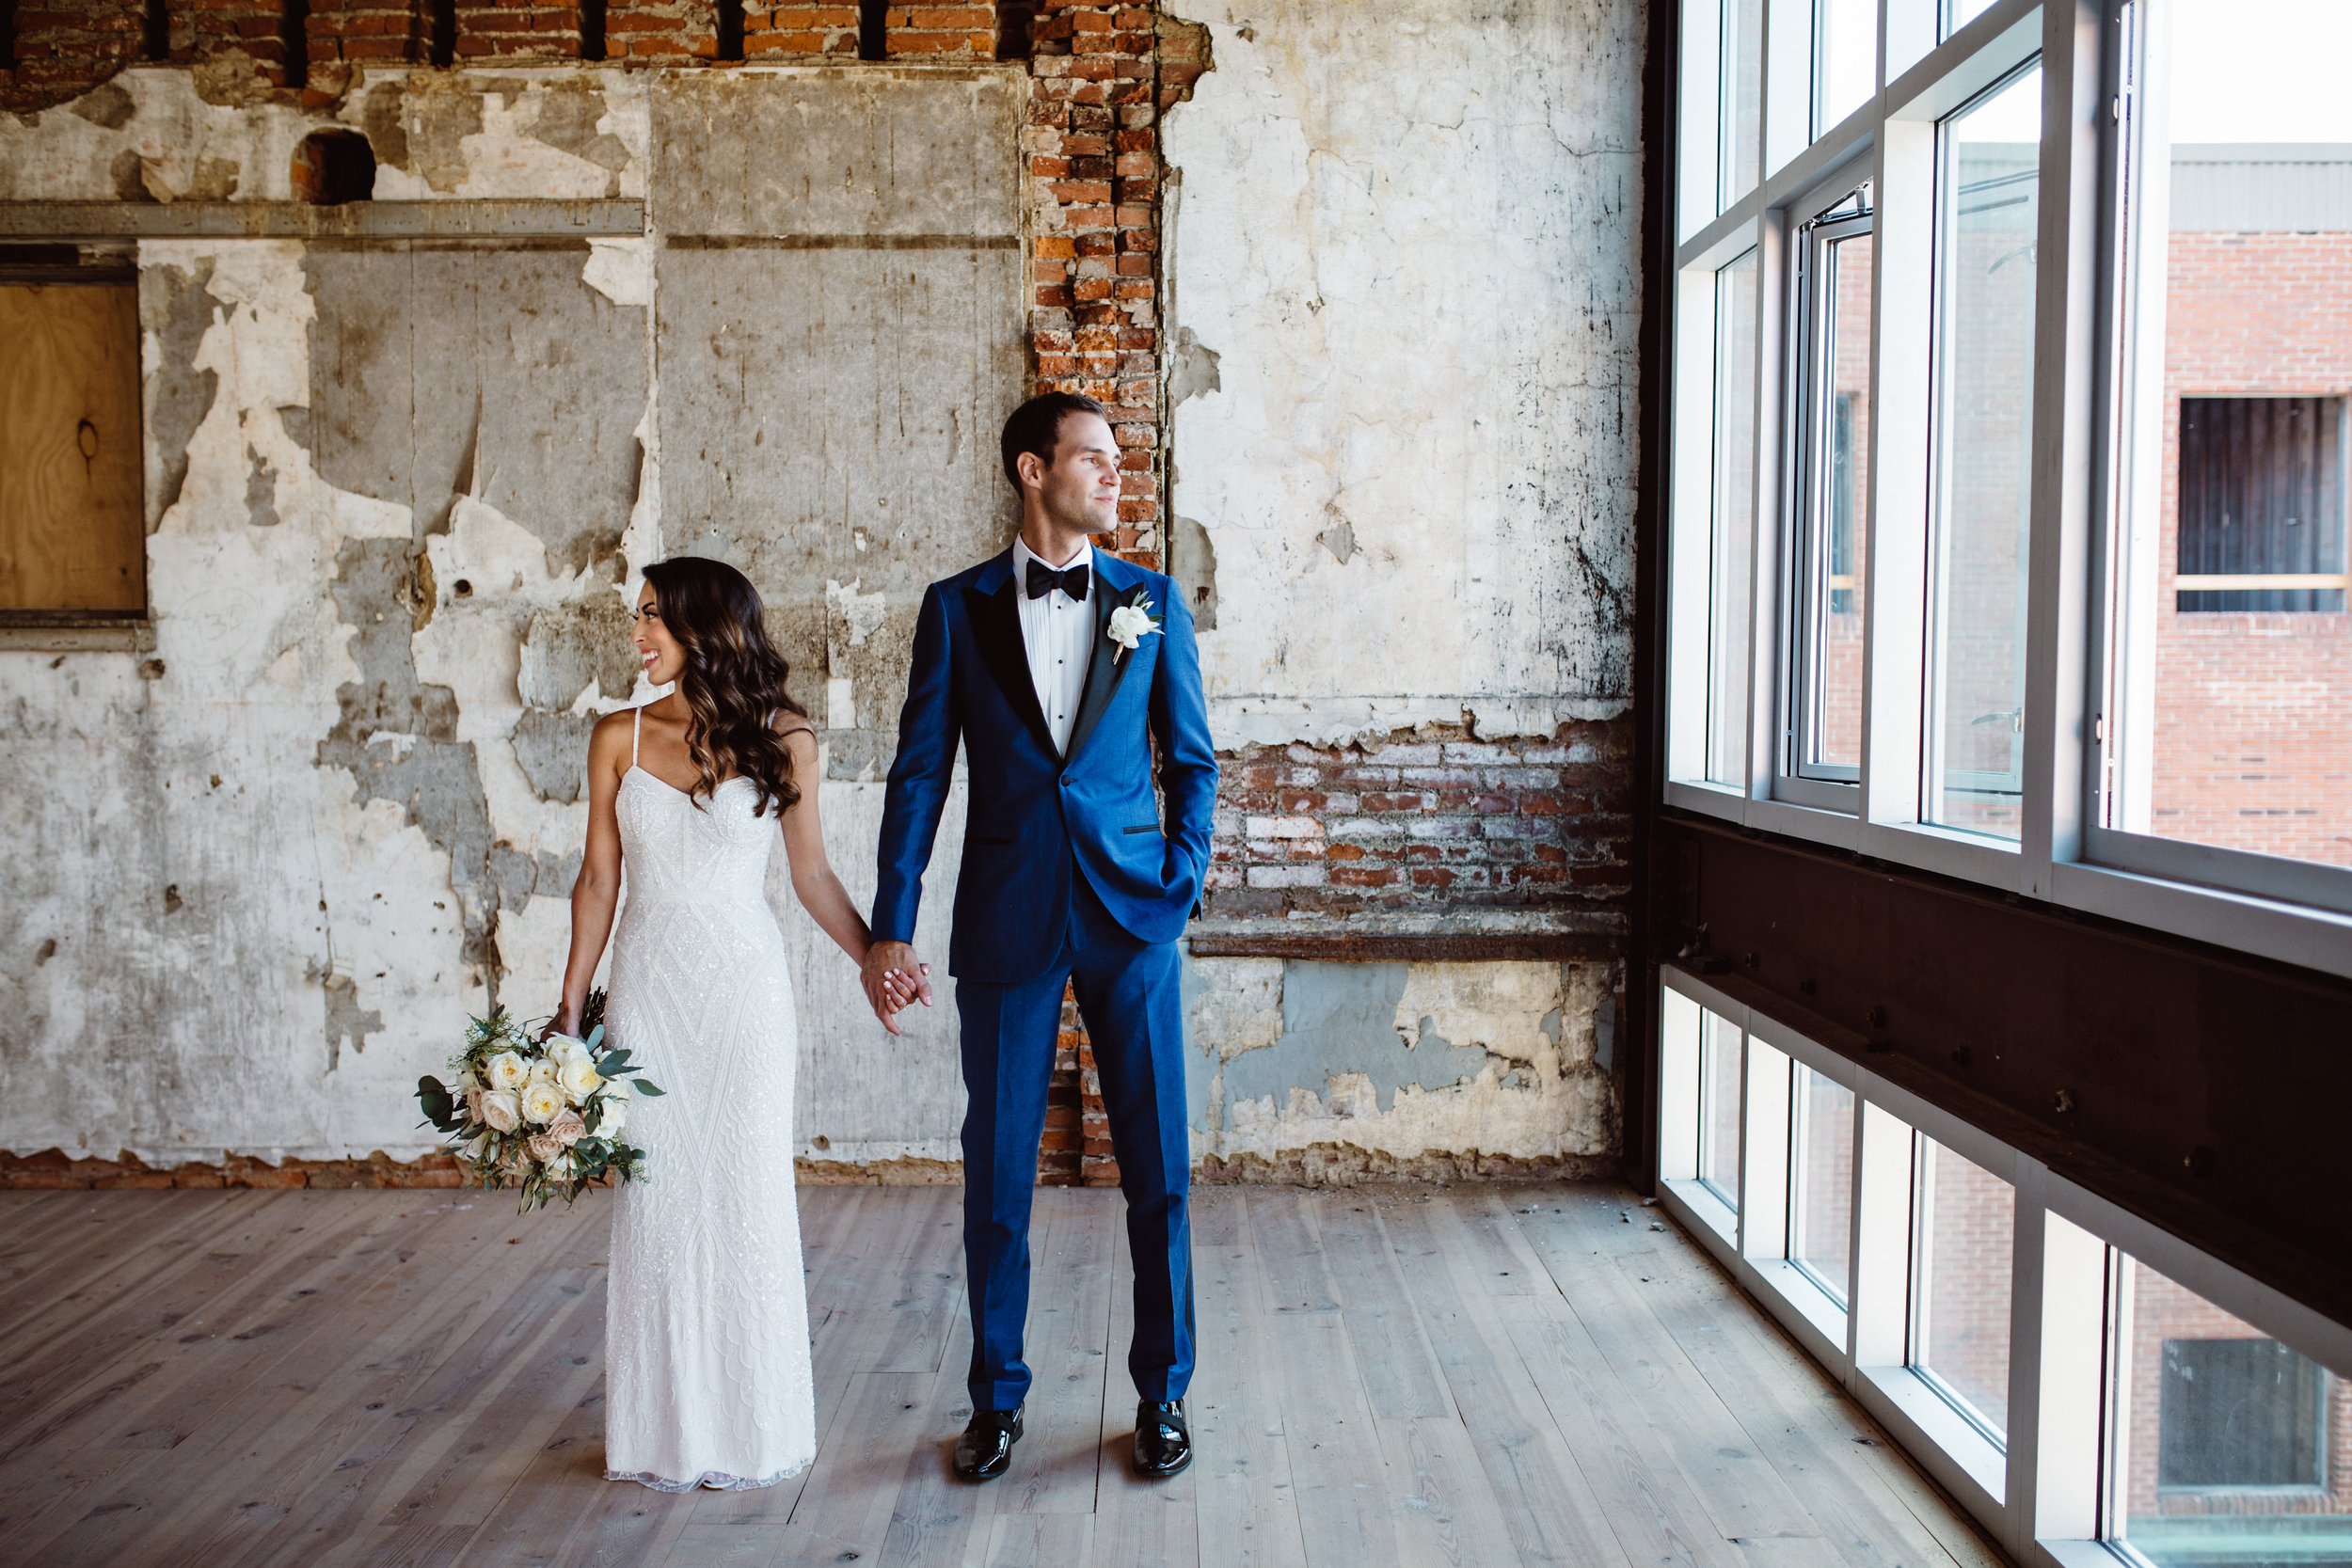 Bride and Groom portrait in rustic antique room with large windows